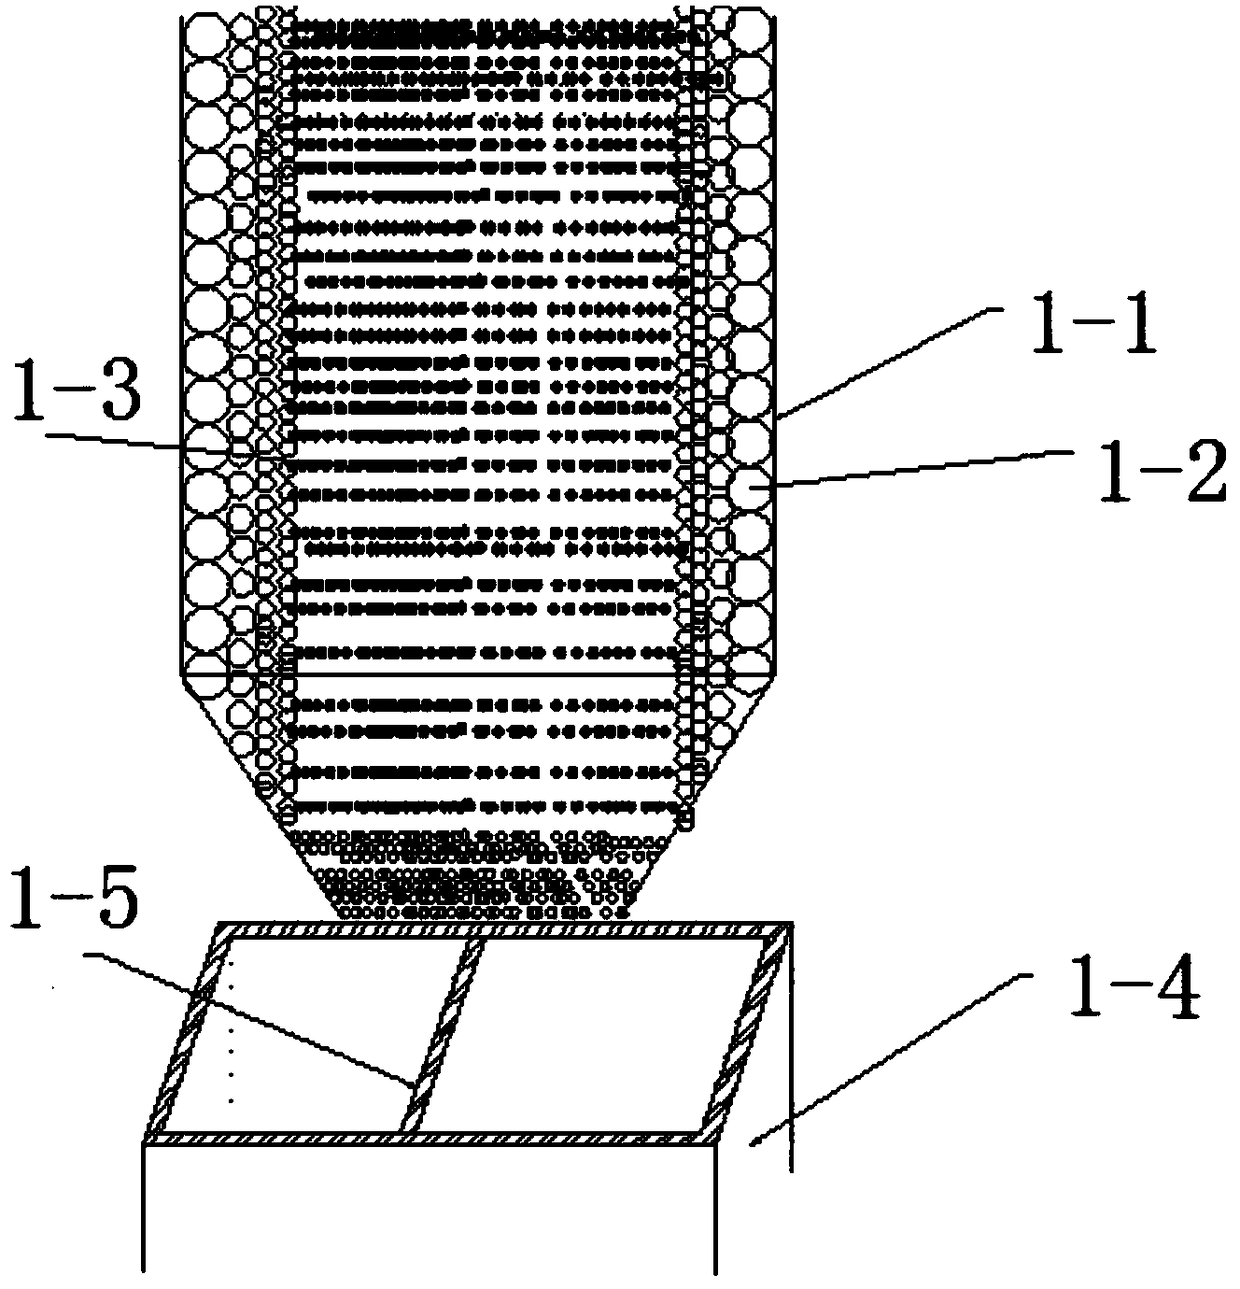 Method for improving raw material mixing efficiency by optimizing frit mixing machine